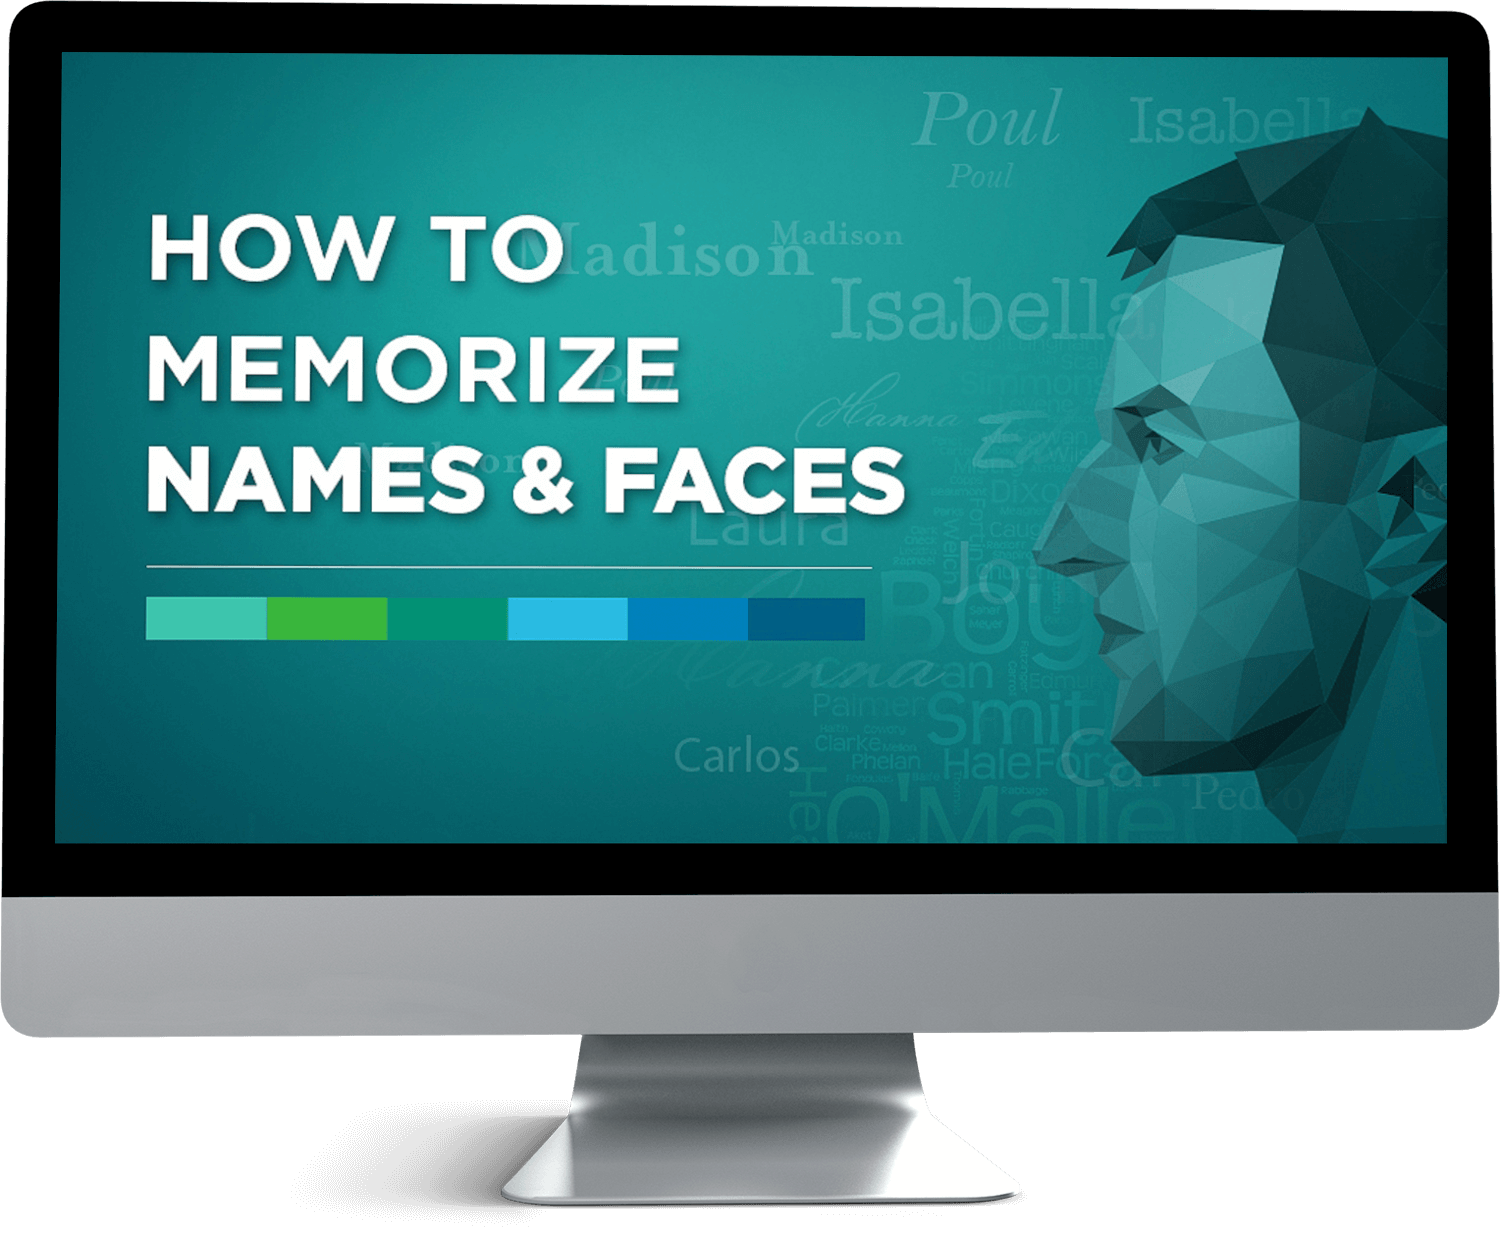 How to memorize names and faces